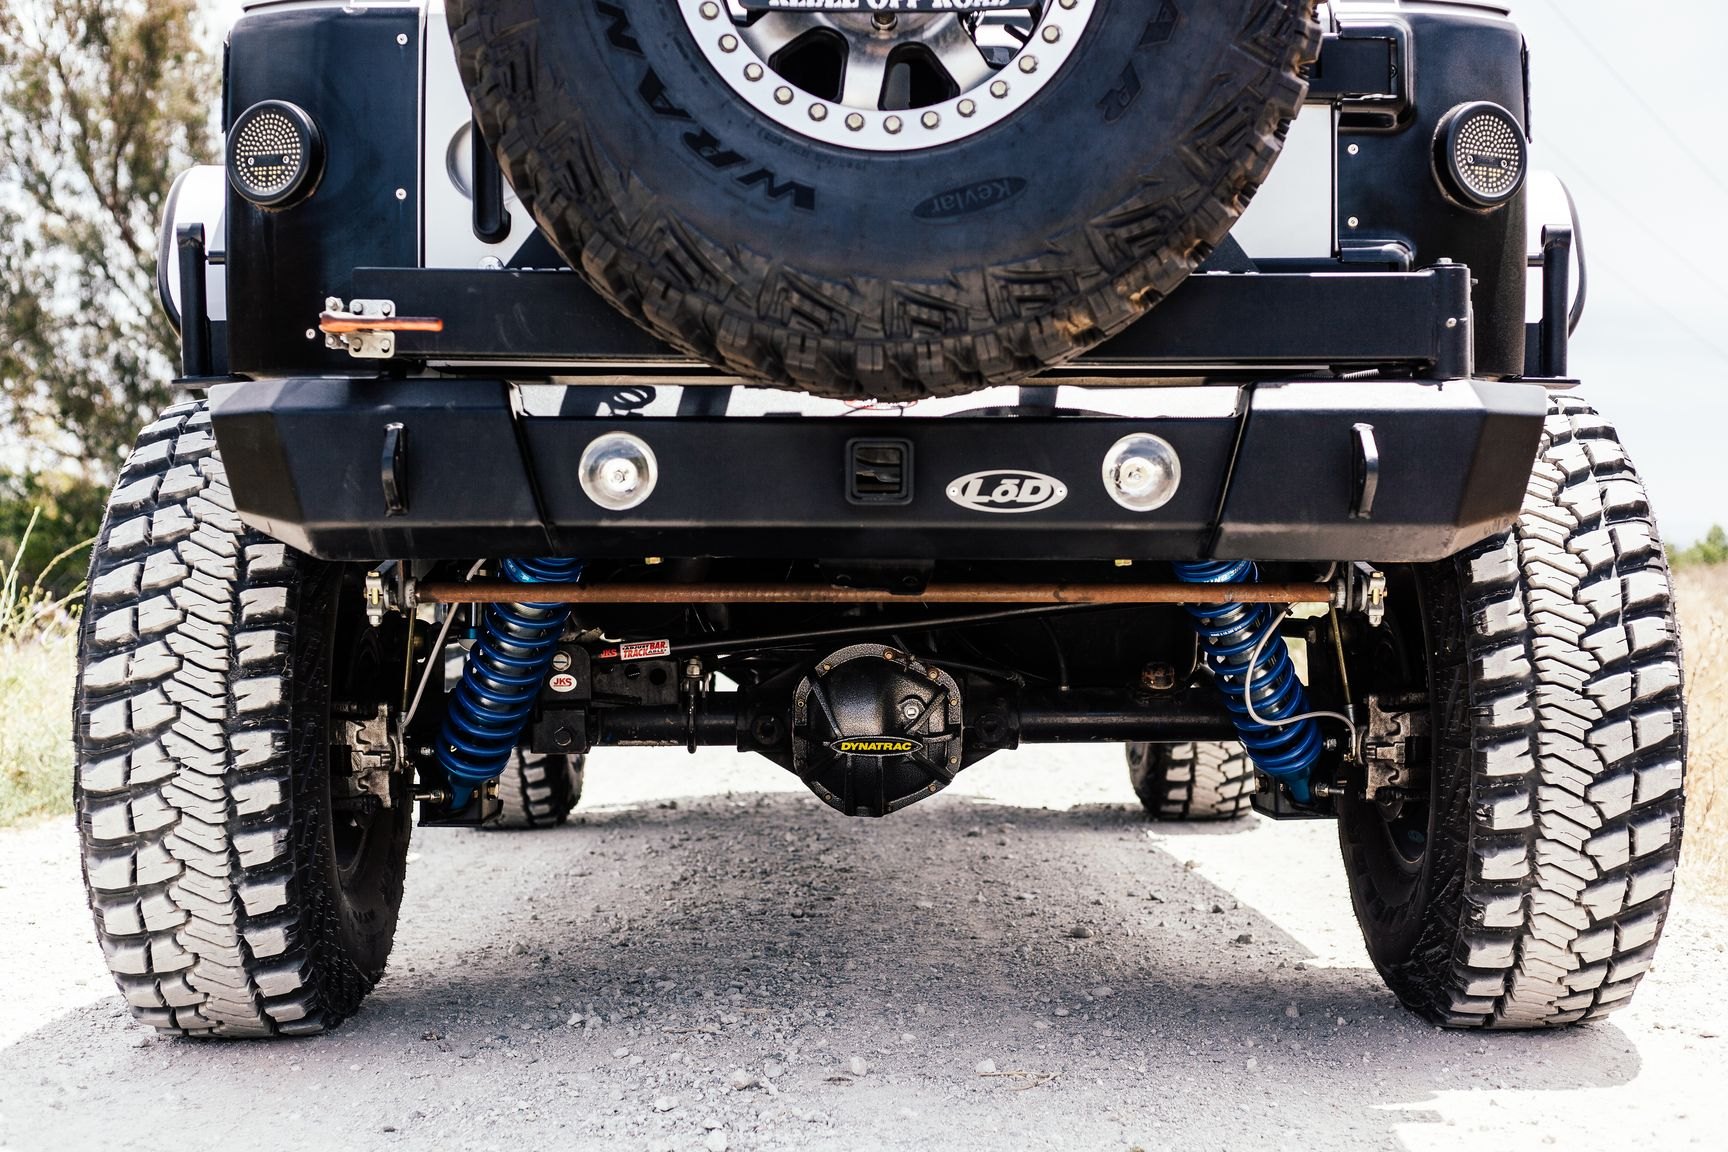 LoD Off-Road Rear Bumper on Gray Lifted Jeep Wrangler - Photo by Rebel Off-Road